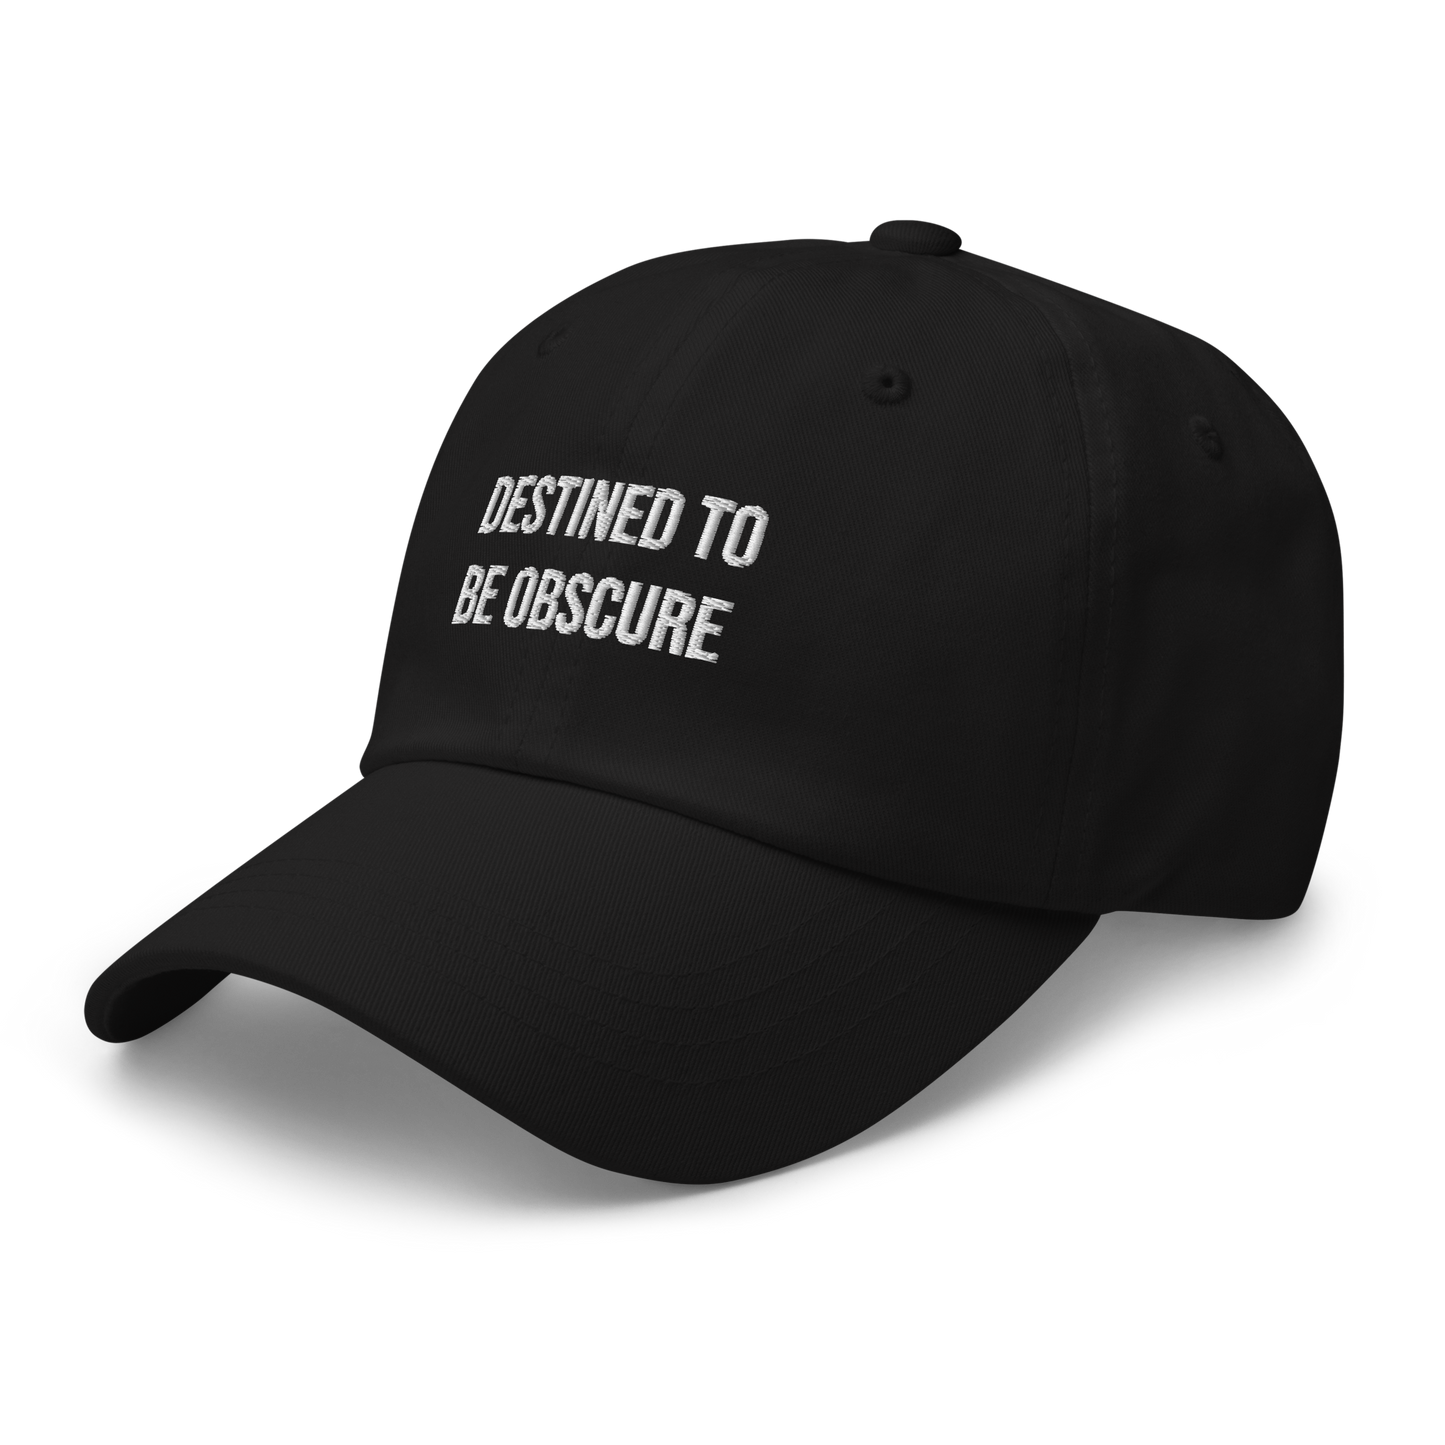 Dad Hat "DESTINED TO BE OBSCURE"